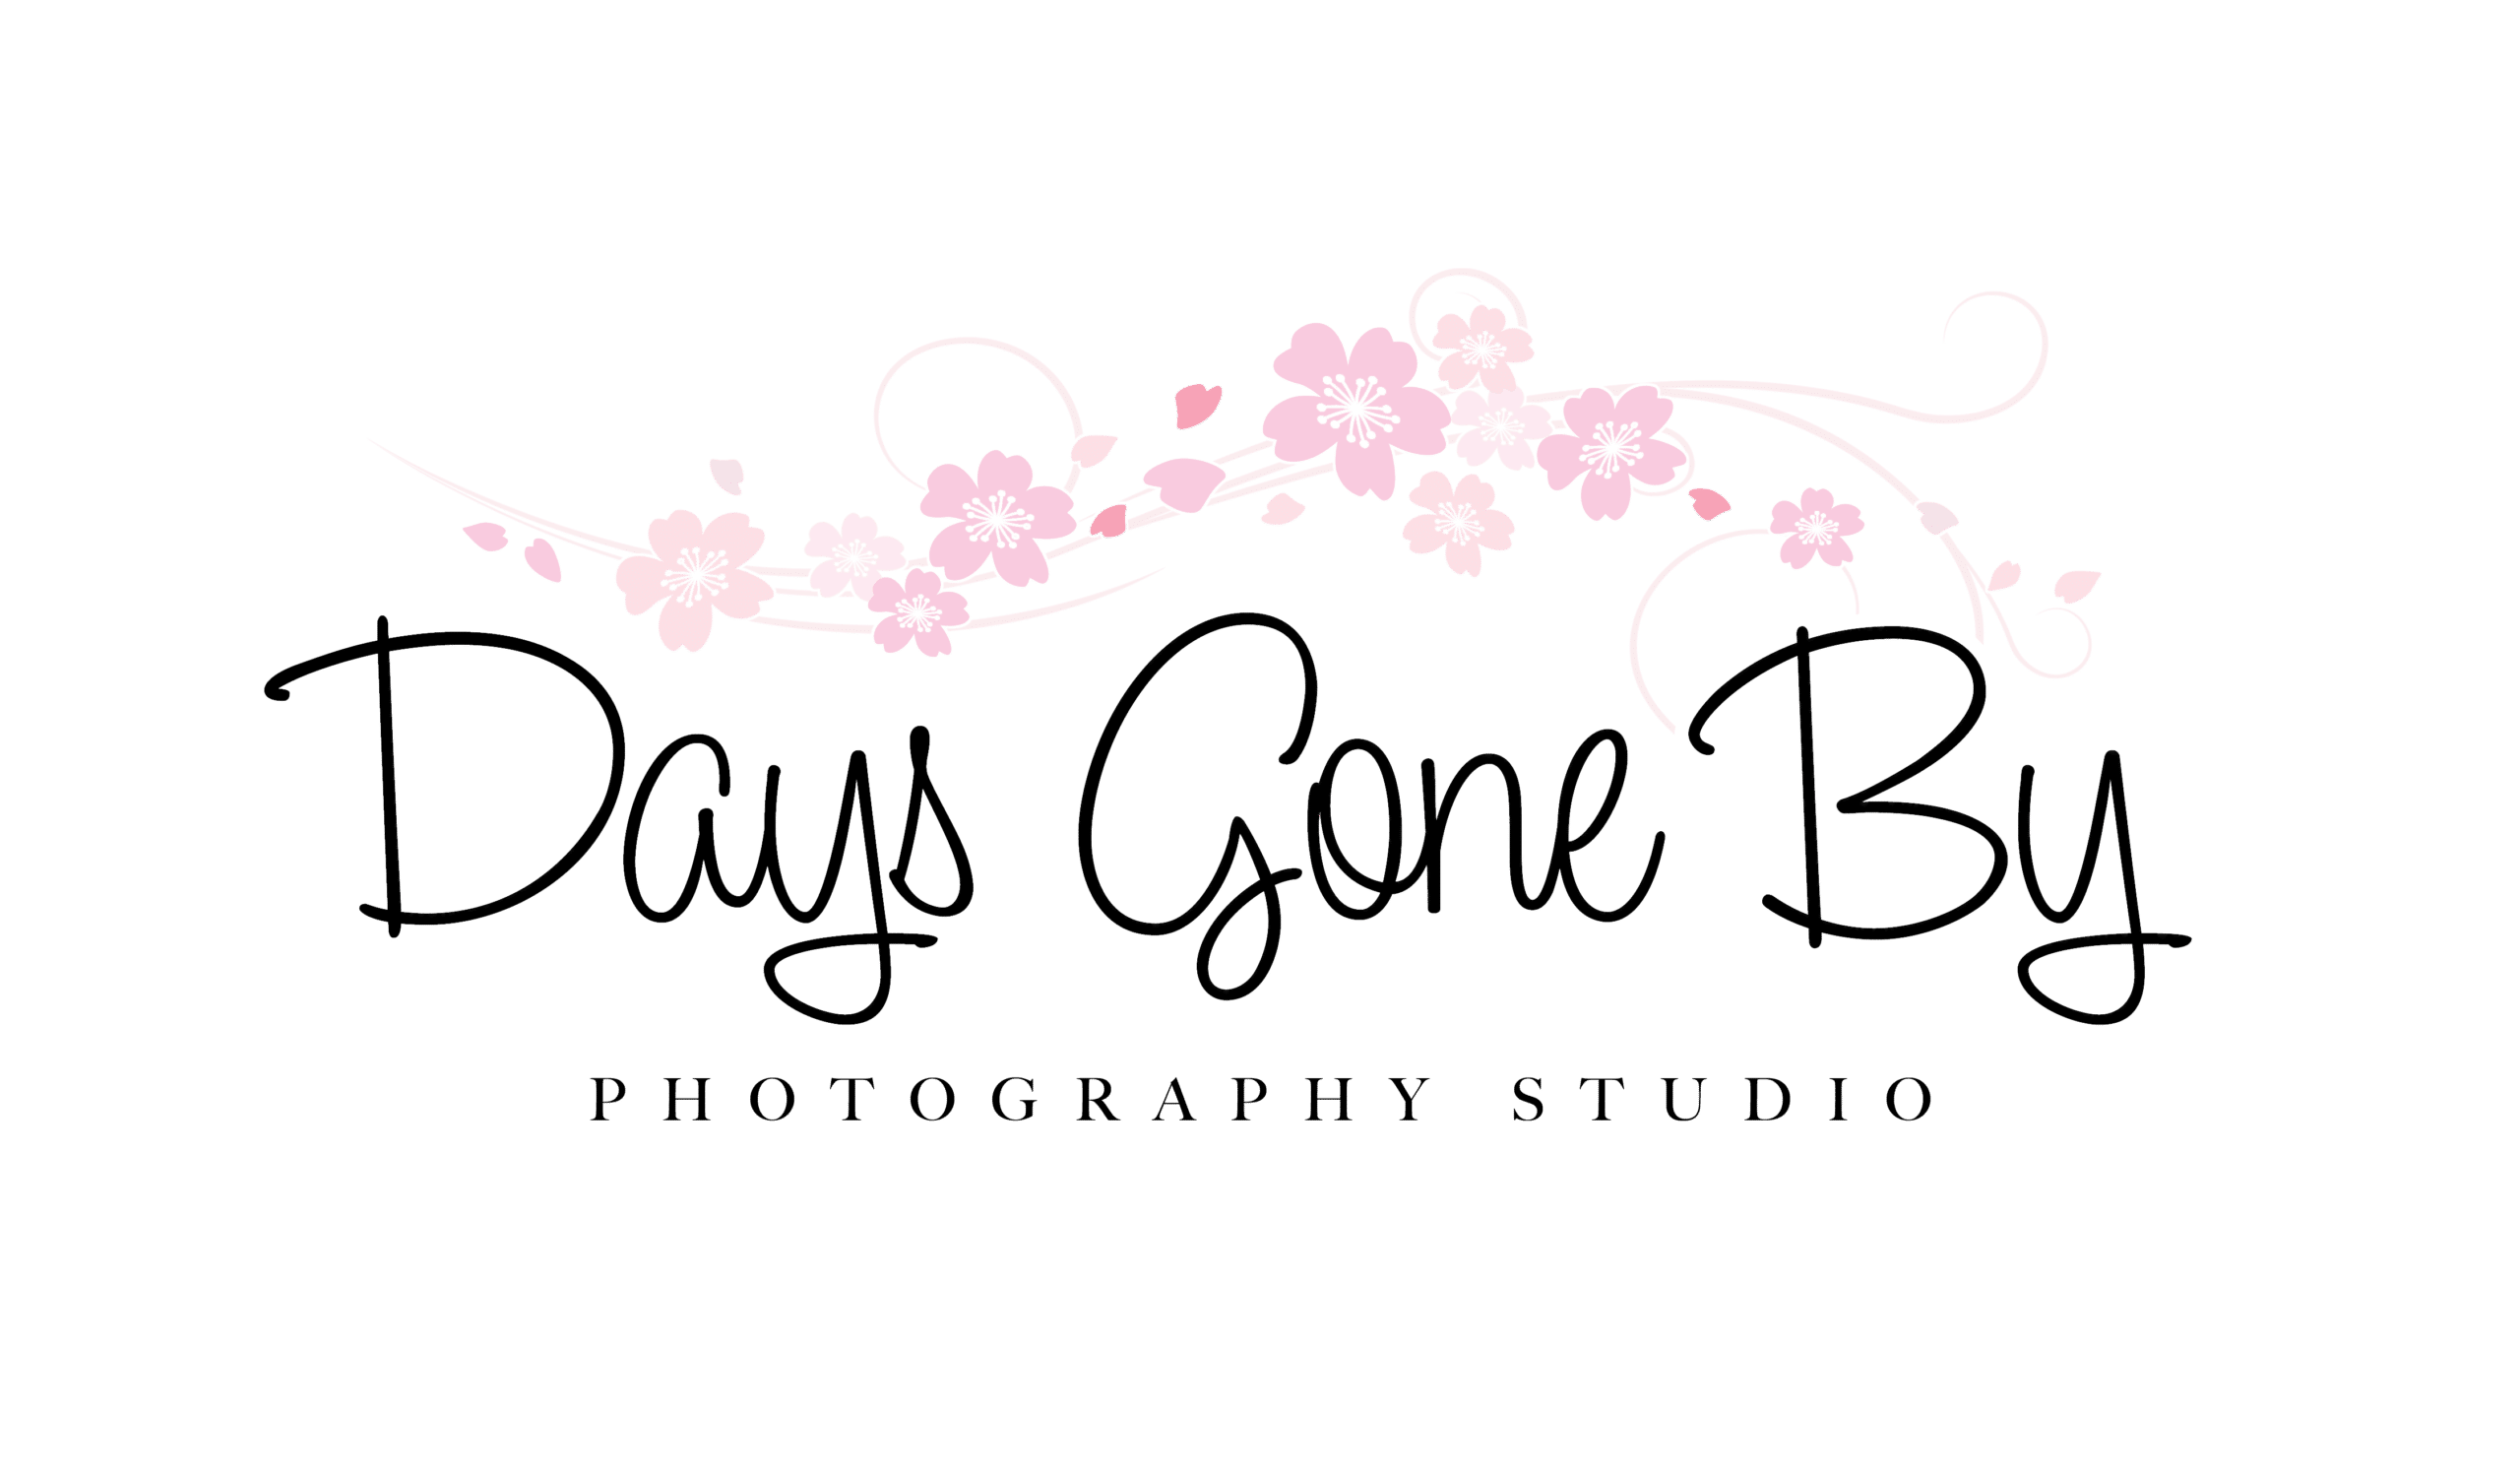 Days Gone By Photography Studio Copy of DGB logo final merged color photography studio rental